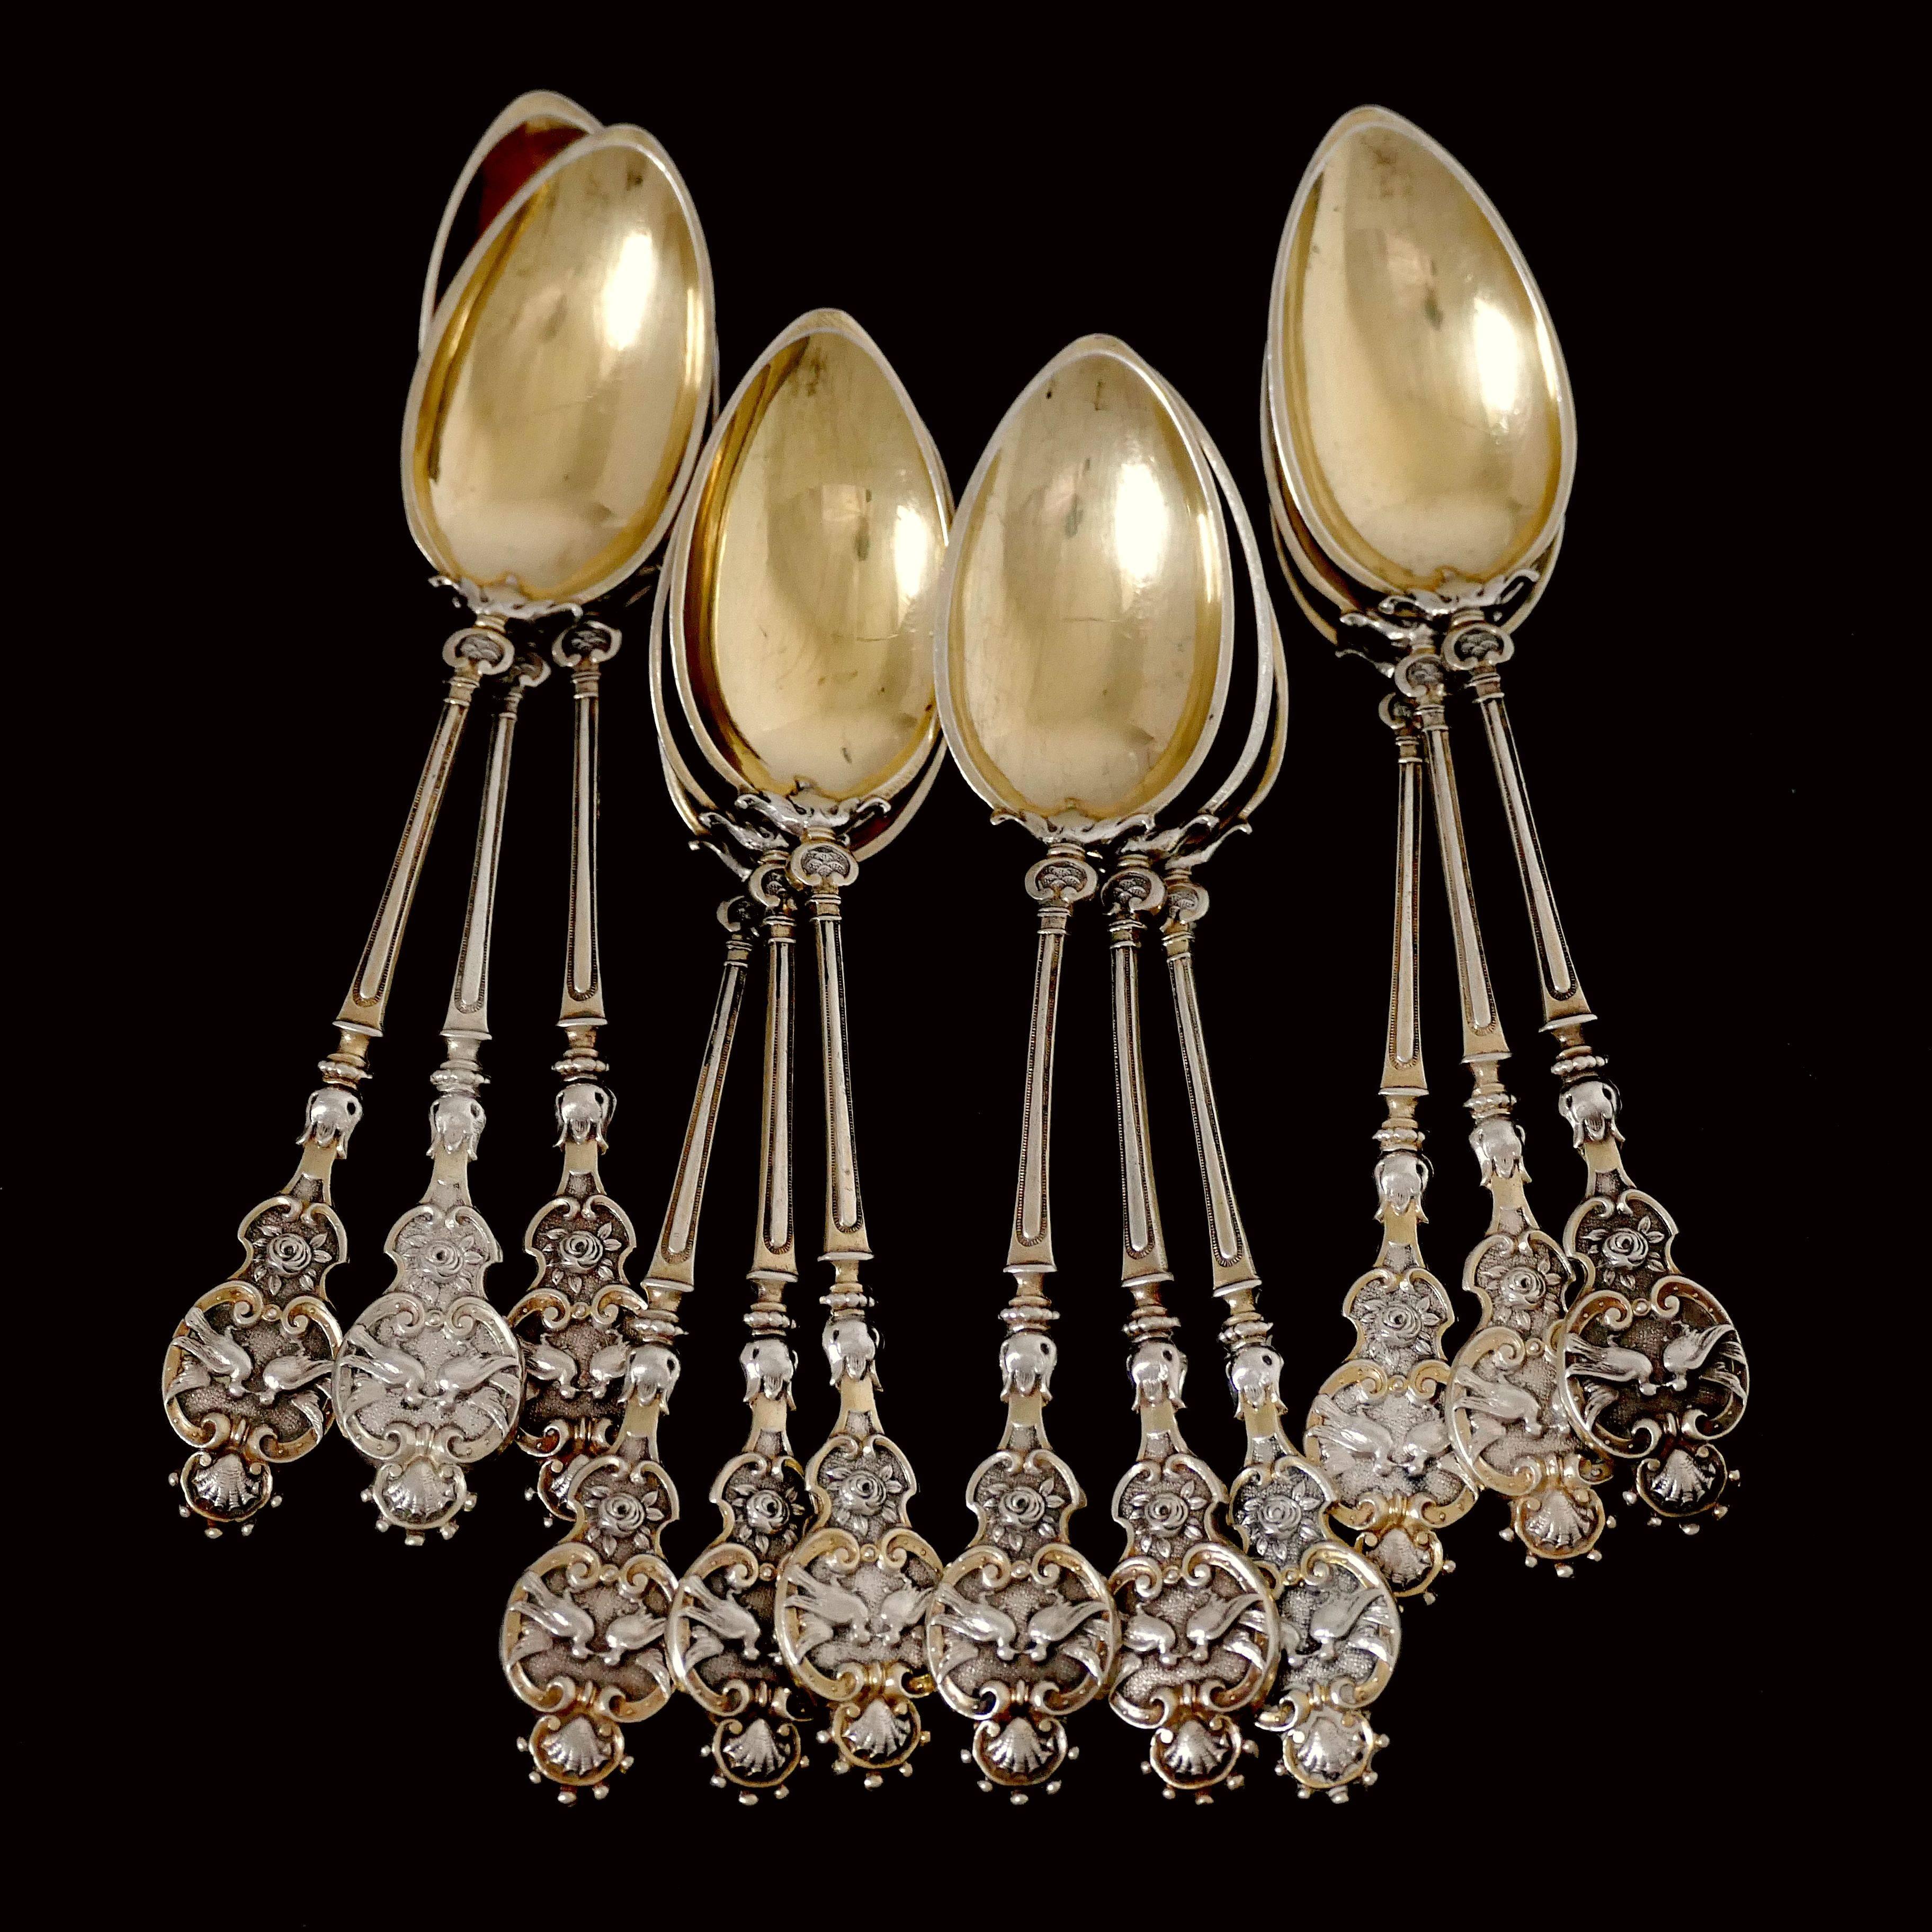 Late 19th Century Bruckmann & Söhne Sterling Silver Gold Tea Coffee Spoons Set of 12 Pieces, Doves For Sale